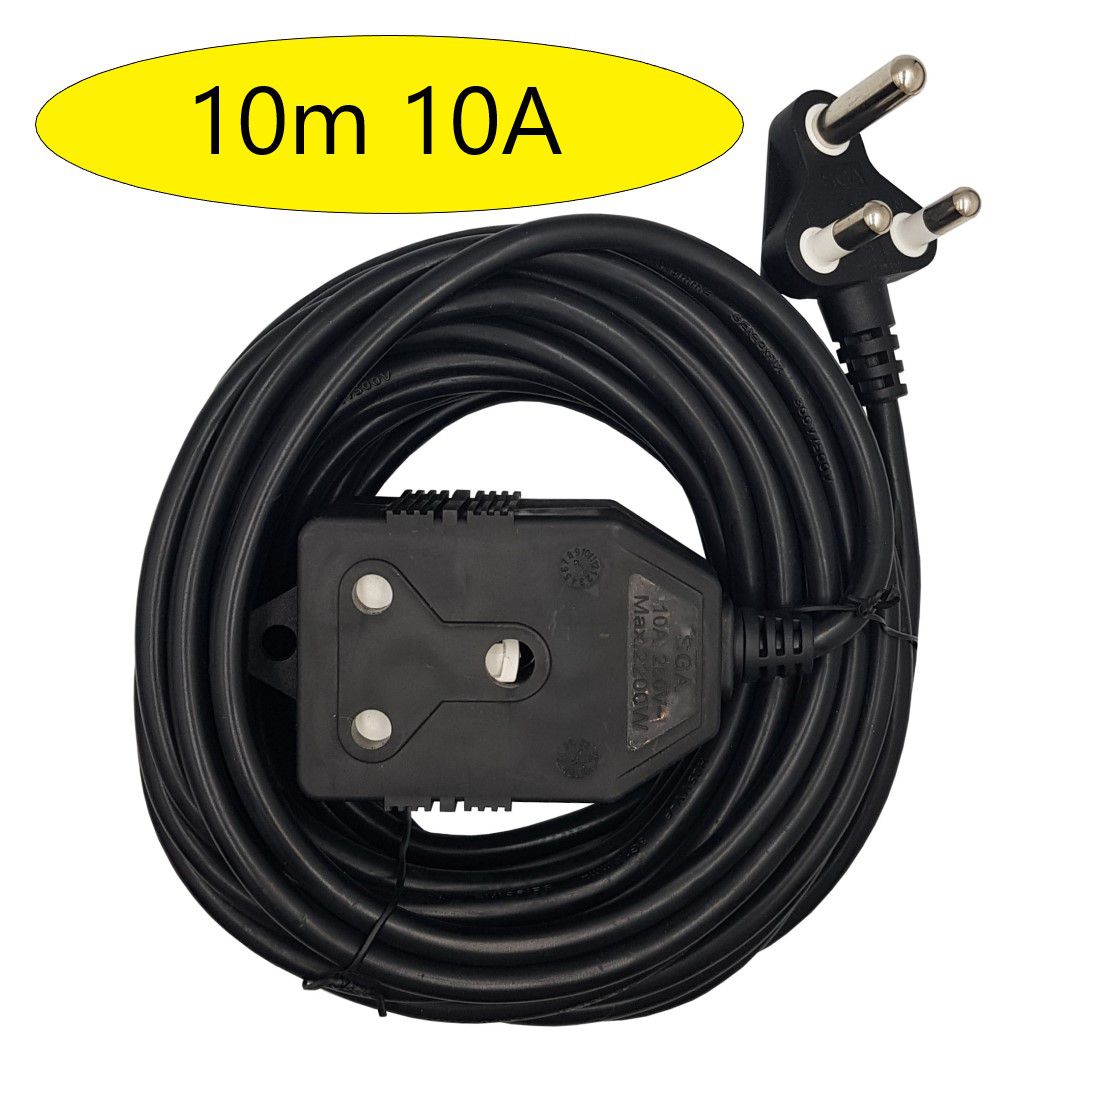 10m Black Extension Electrical Cord / Lead / Cable: Double Coupler - 10A